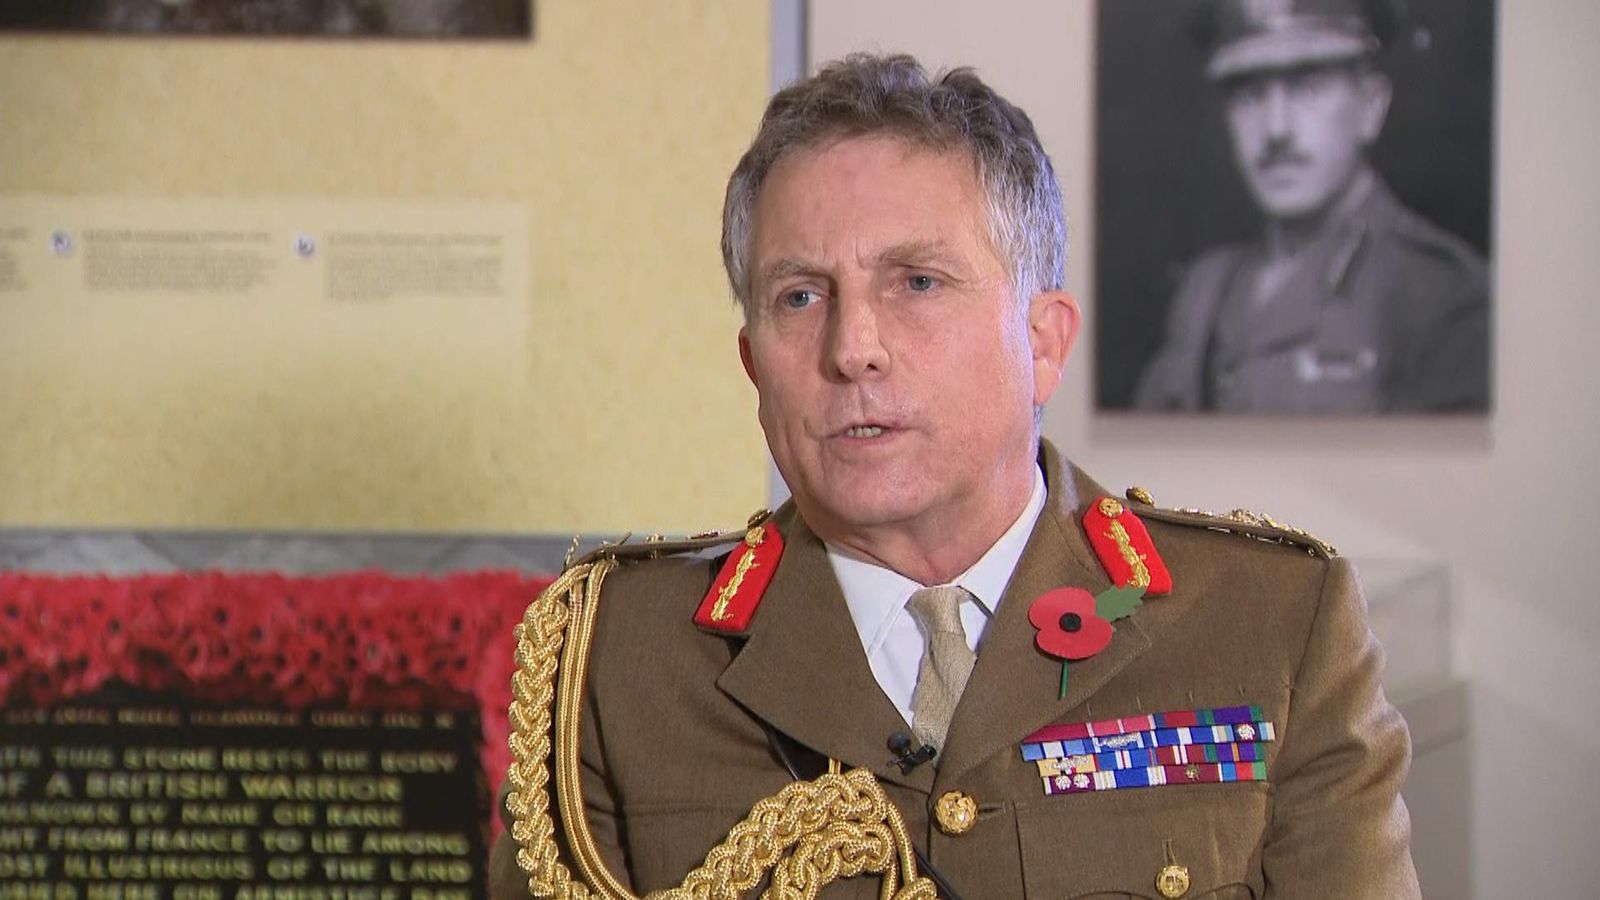 Risk of new world war is real, head of UK armed forces warns | UK News | Sky News